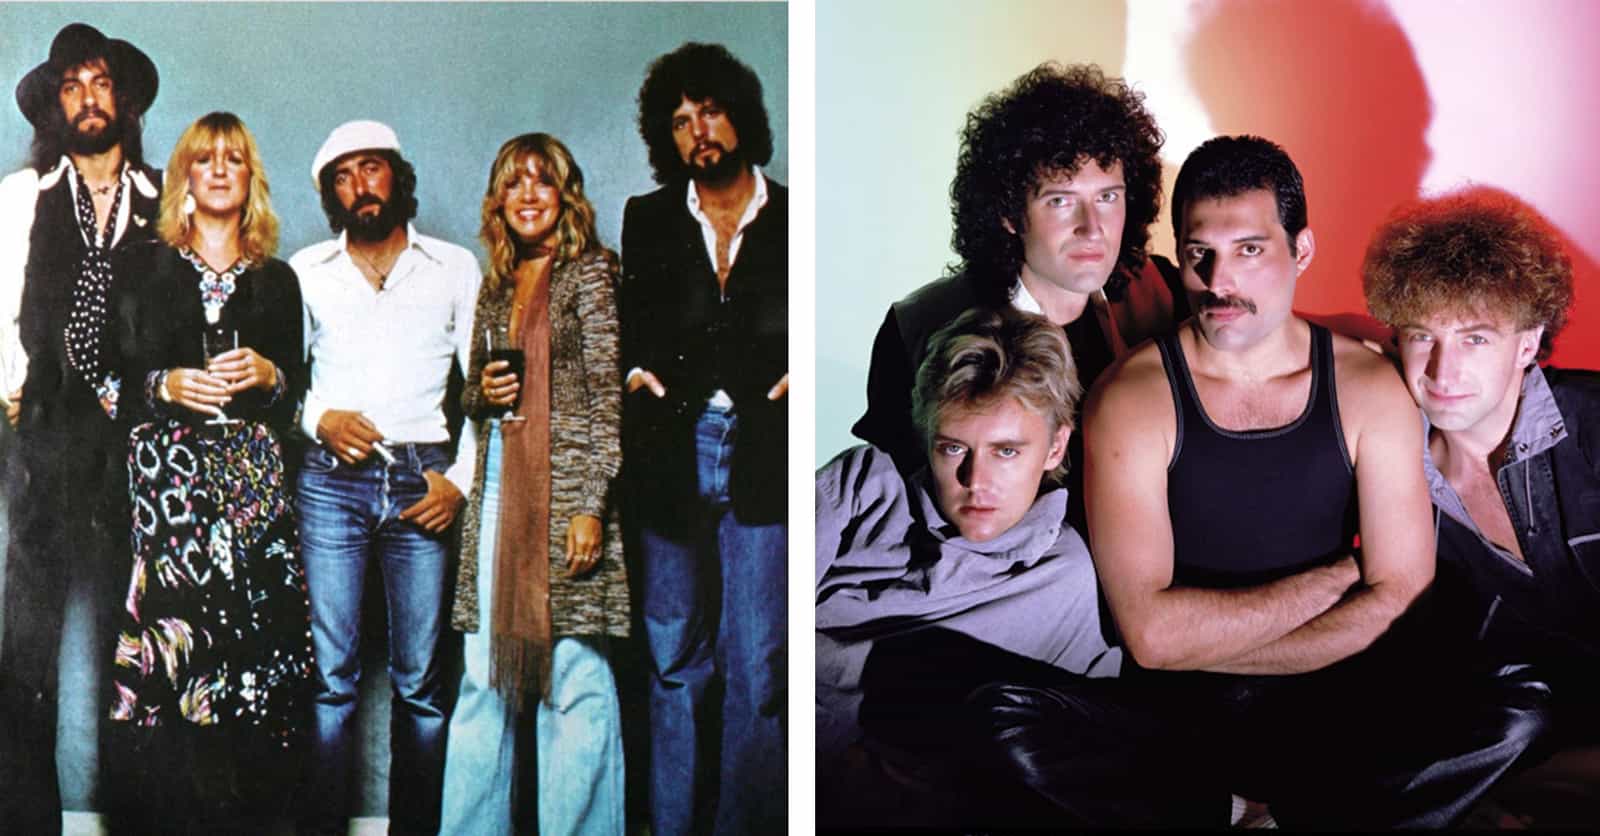 The Greatest Musical Artists of the '80s